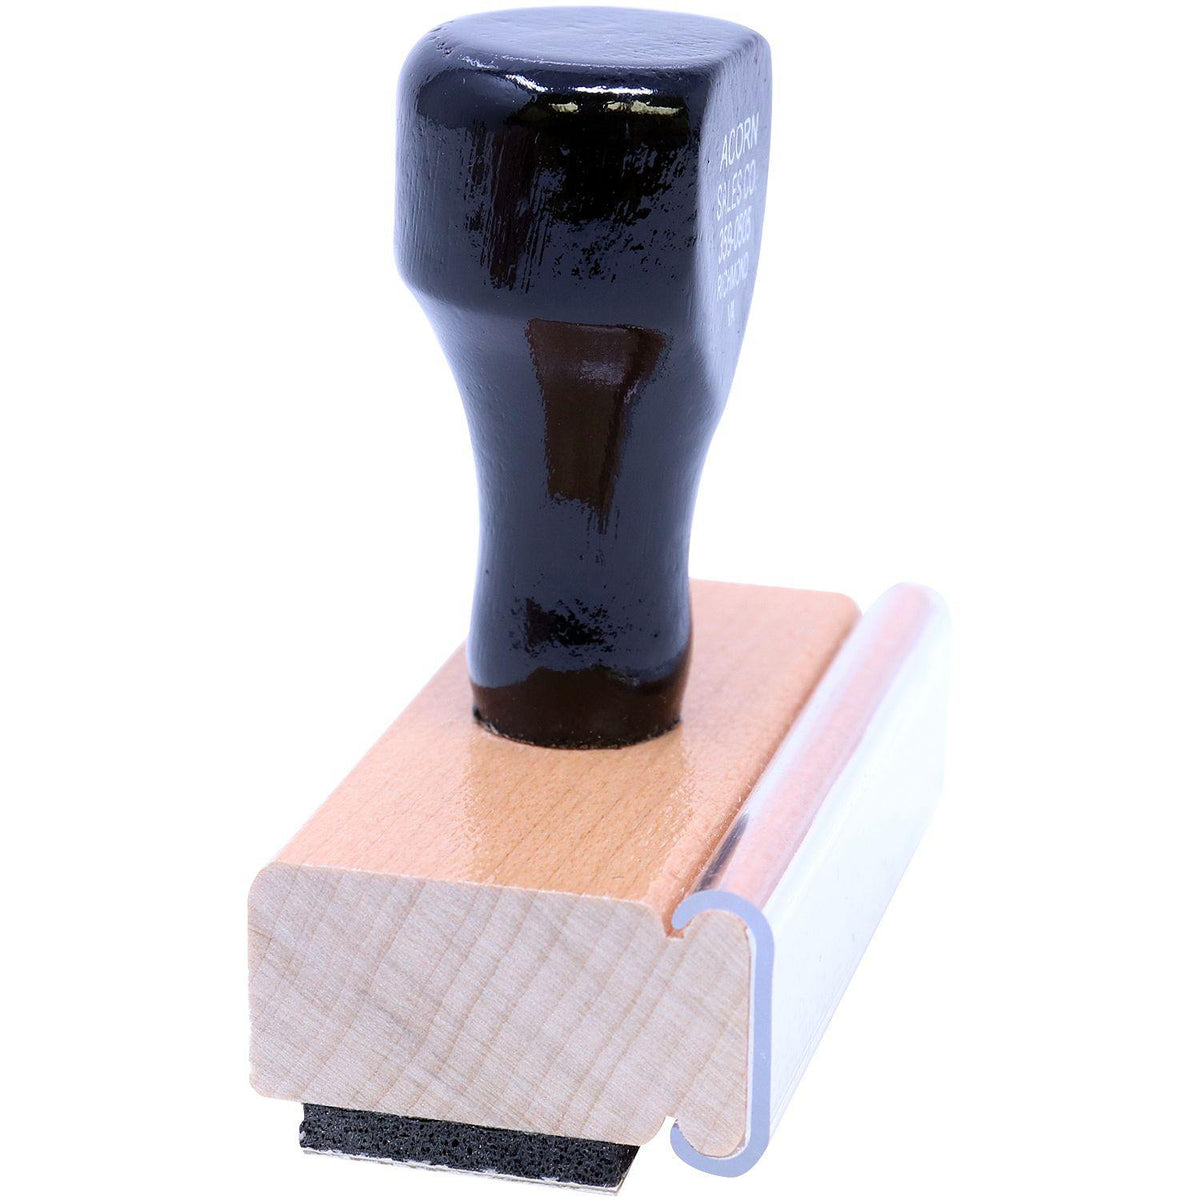 Side View of Large Corrected Rubber Stamp at an Angle